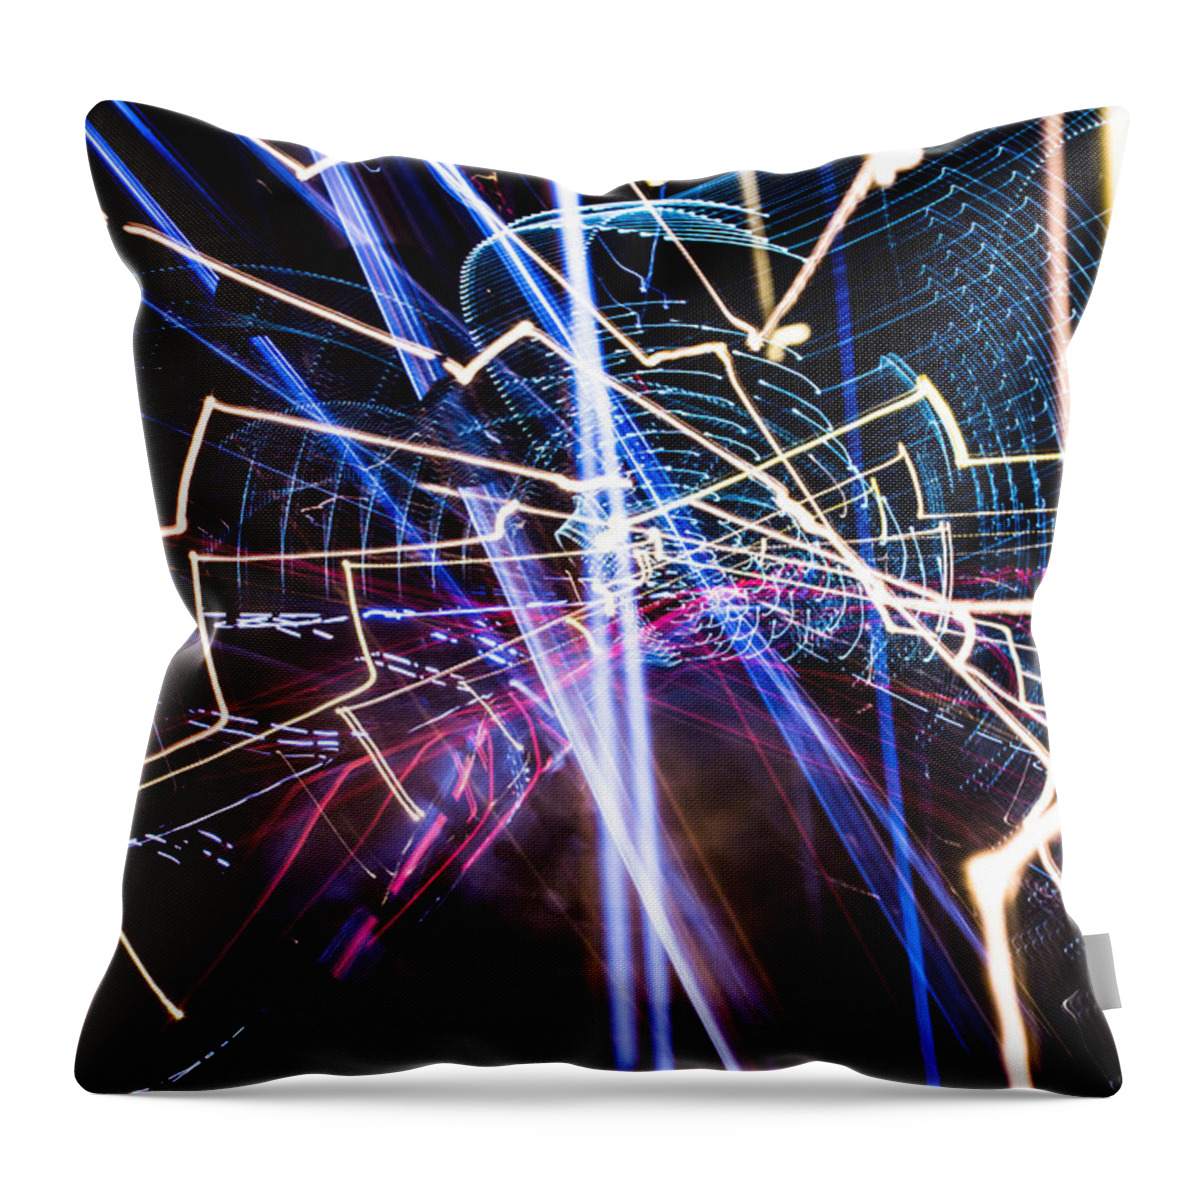  Throw Pillow featuring the photograph Image Burn by Micah Goff